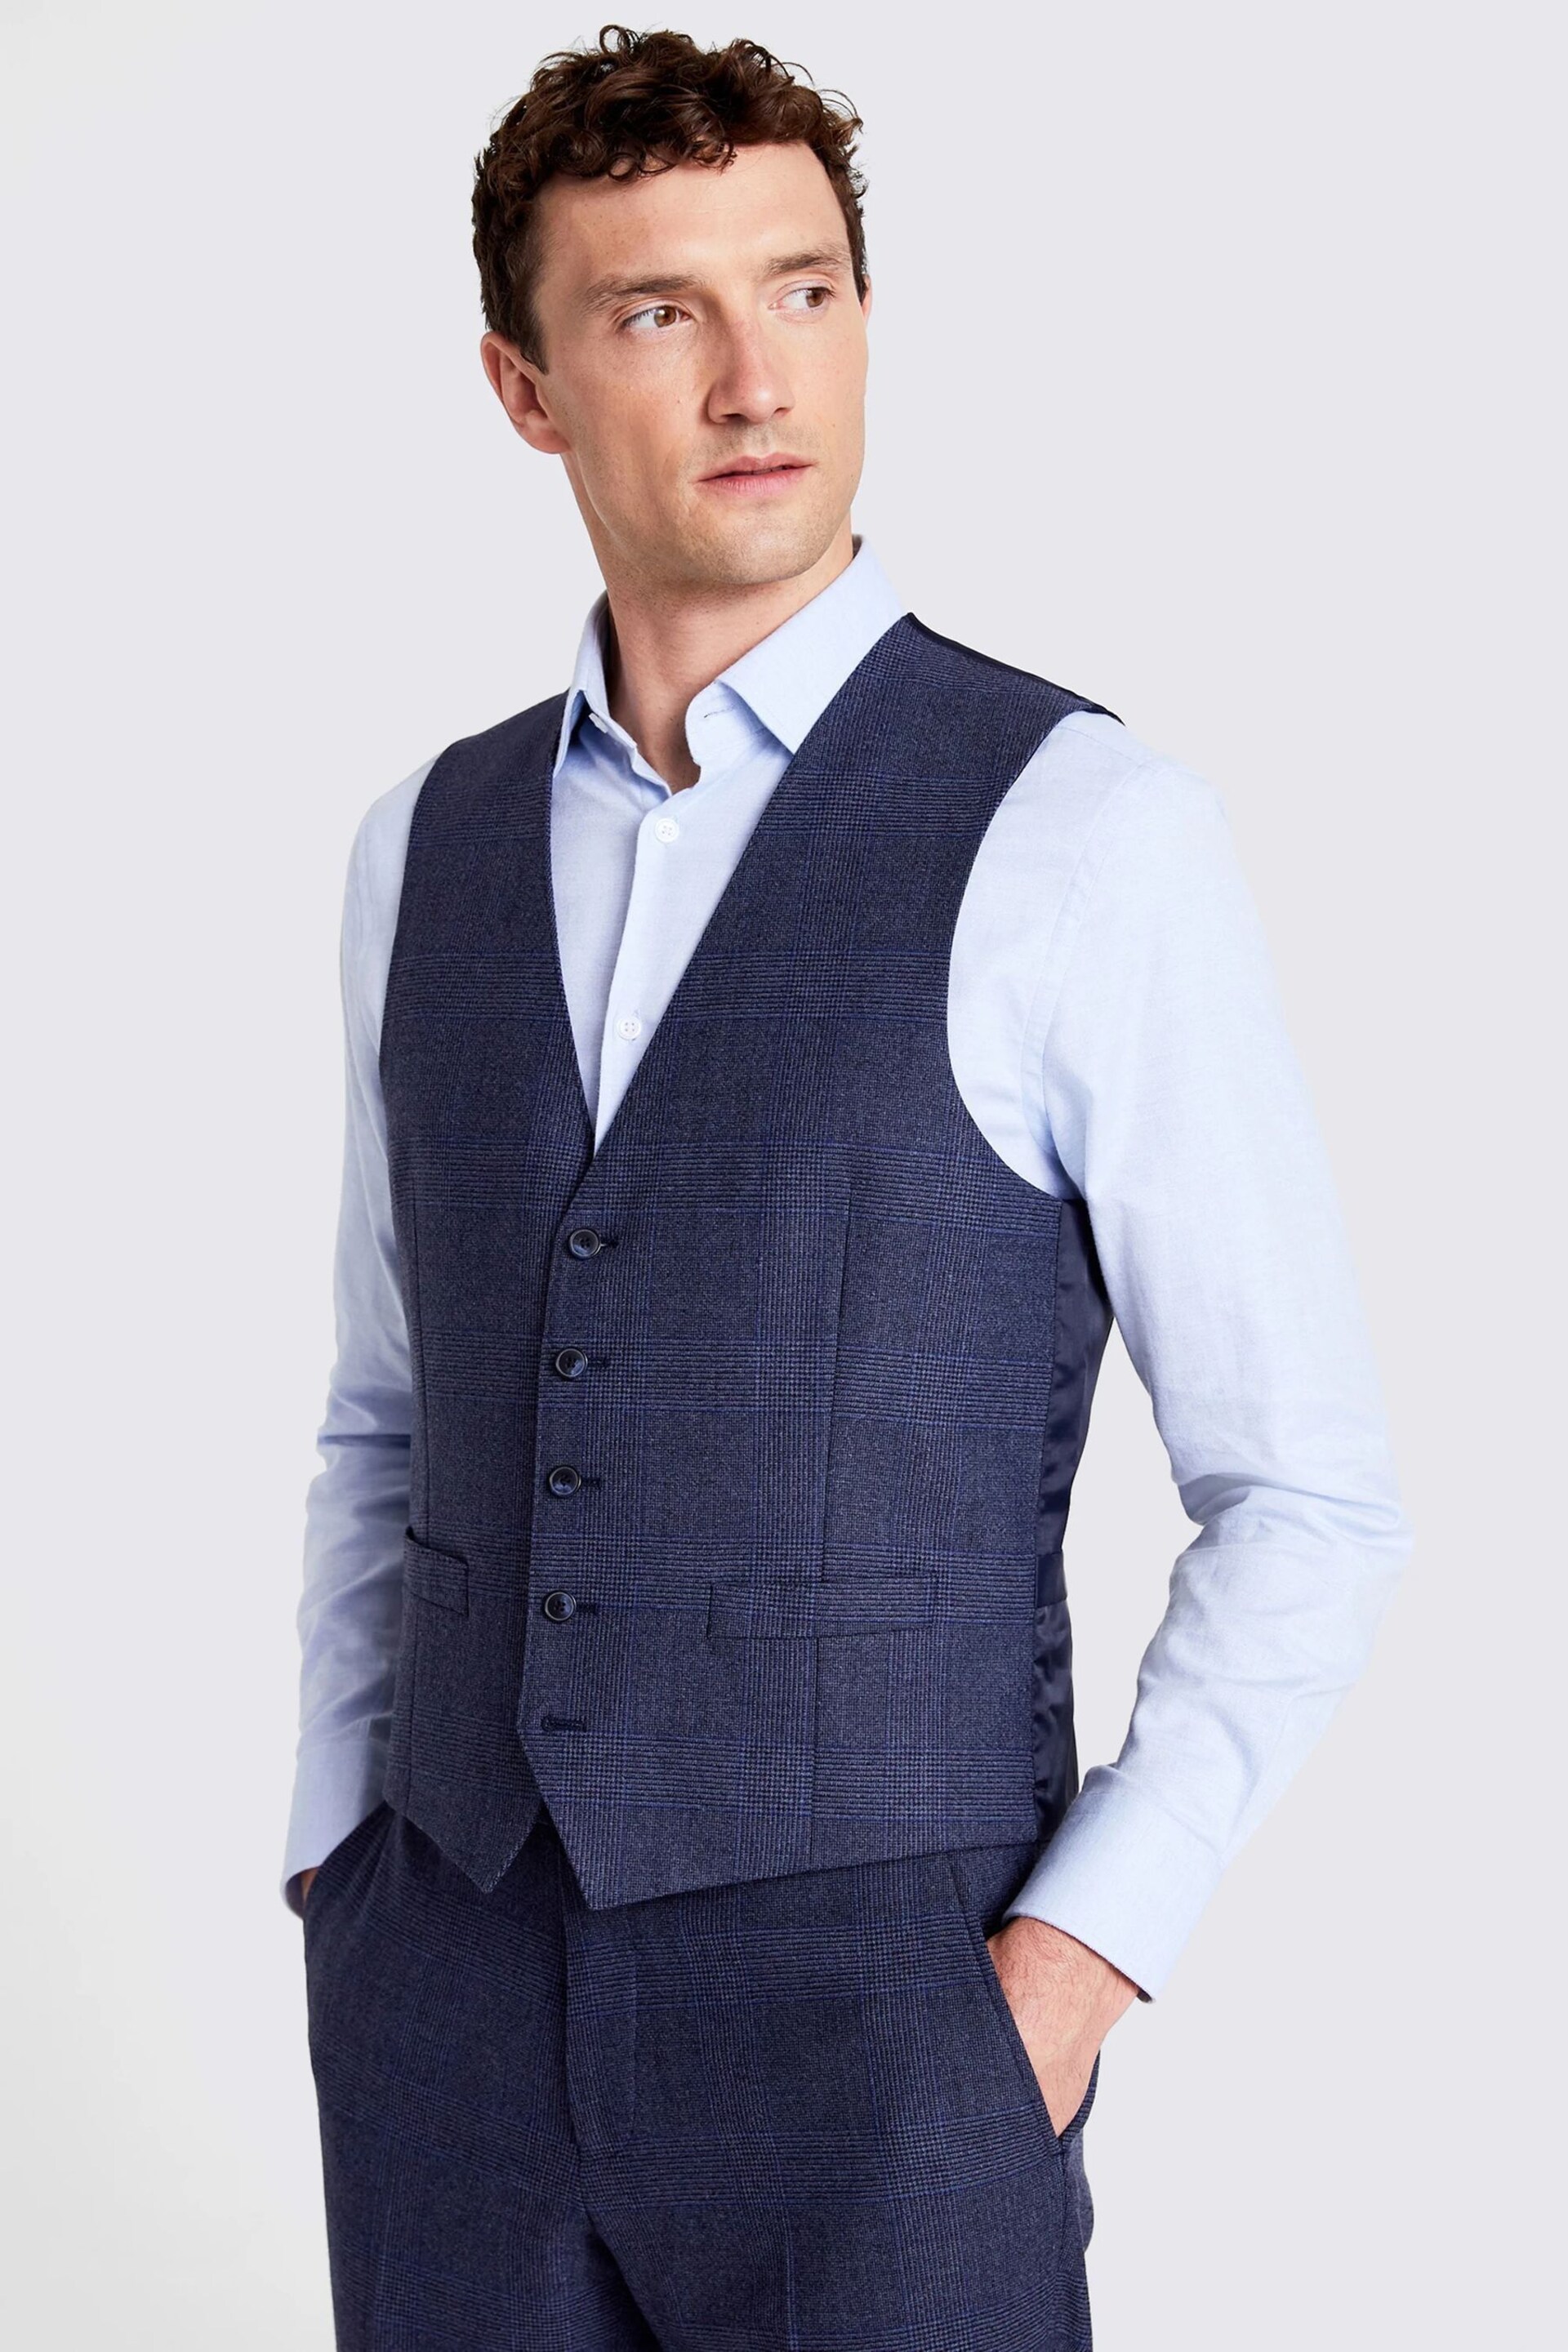 MOSS Blue Tailored Fit Check Waistcoat - Image 1 of 1